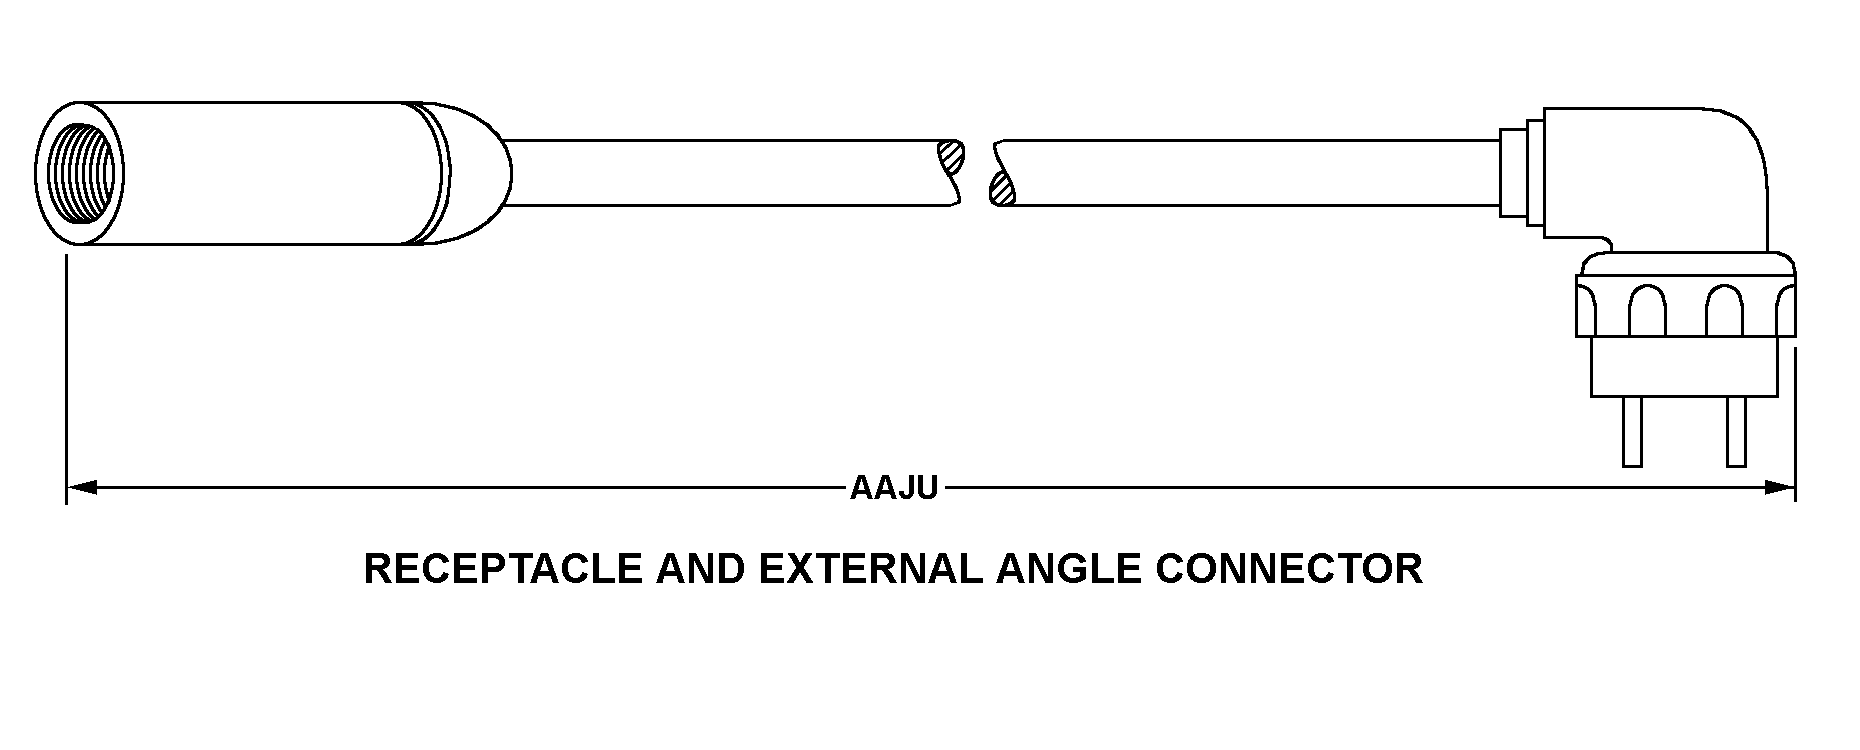 RECEPTACLE AND EXTERNAL ANGLE CONNECTOR style nsn 5995-01-187-4980